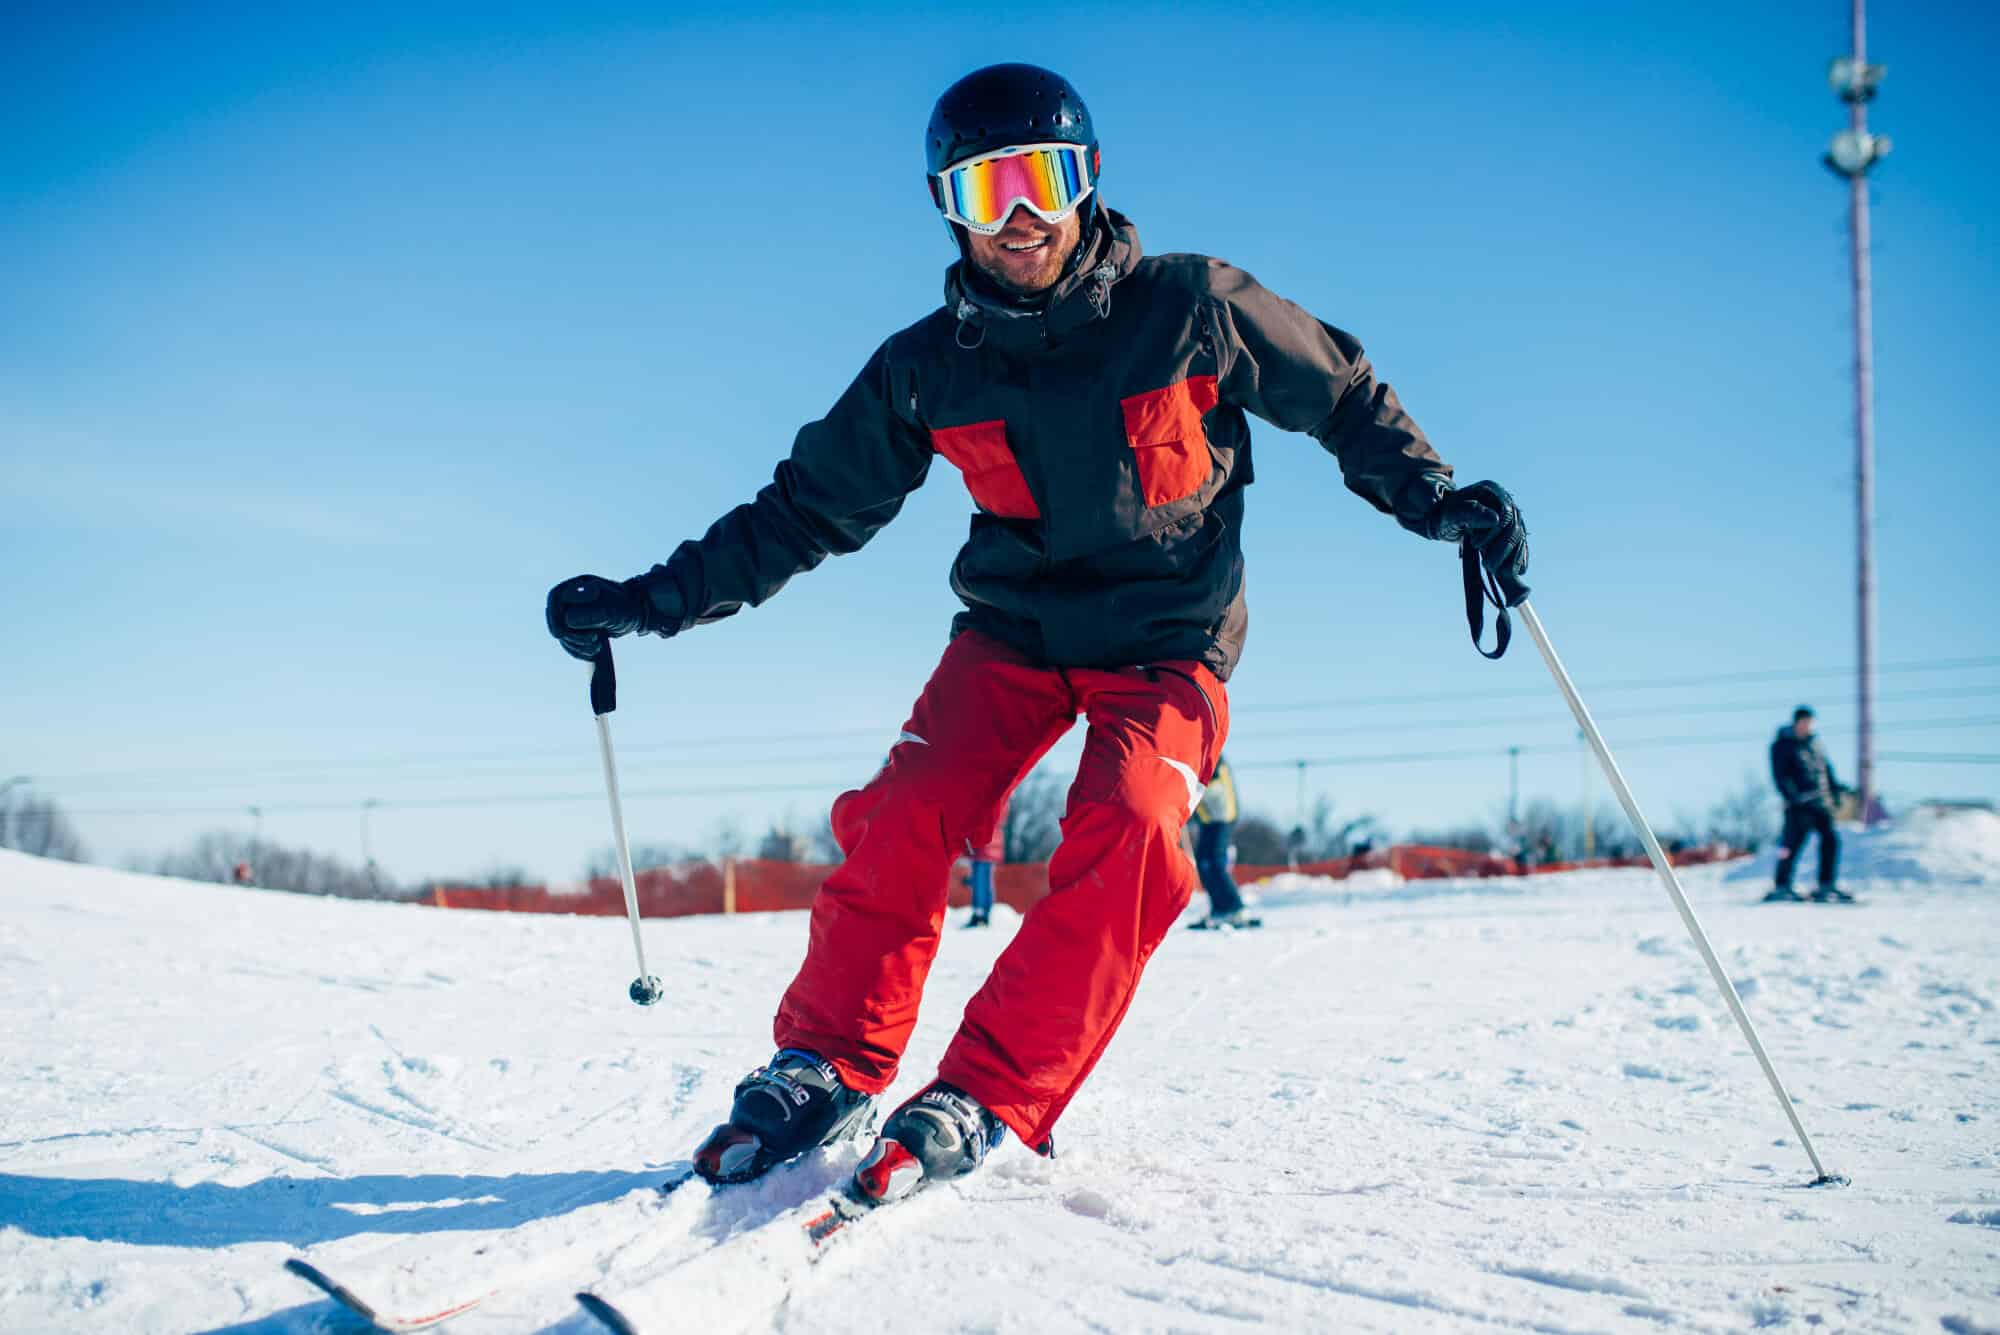 Skier with safety glasses on, smiling -Winter Sport Safety